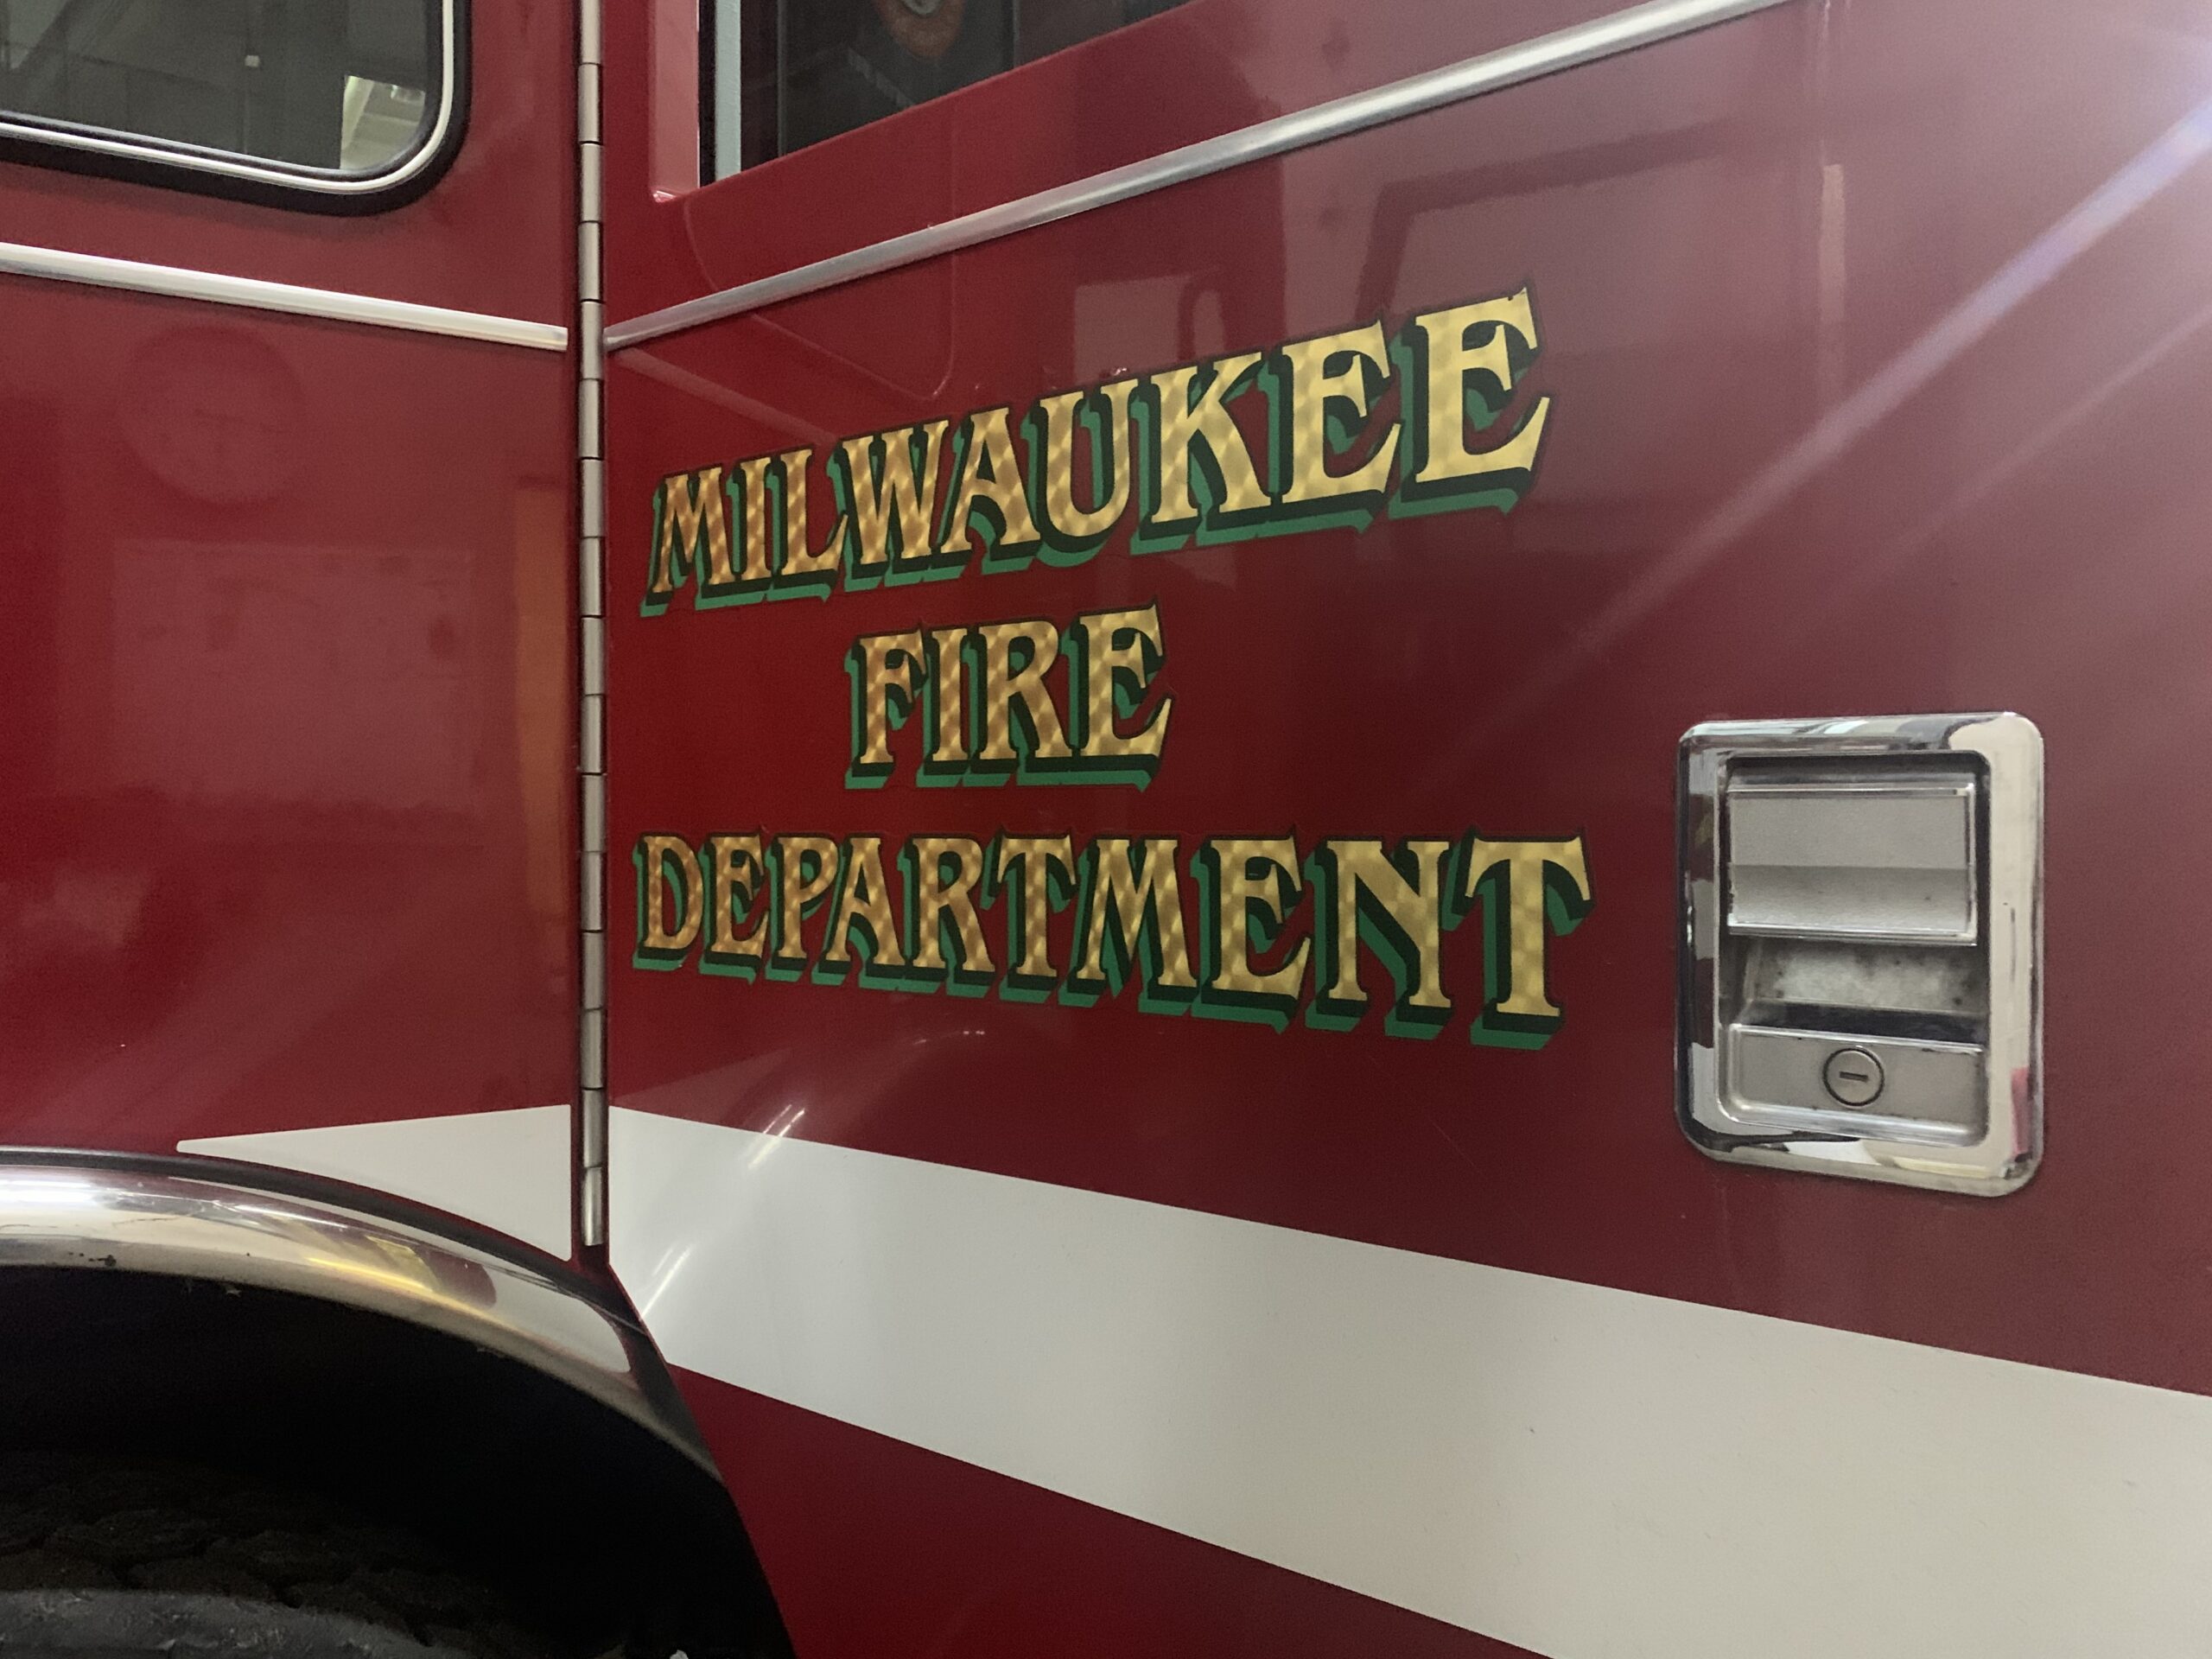 Following years of fire station closures, Milwaukee reopens station after shared revenue deal